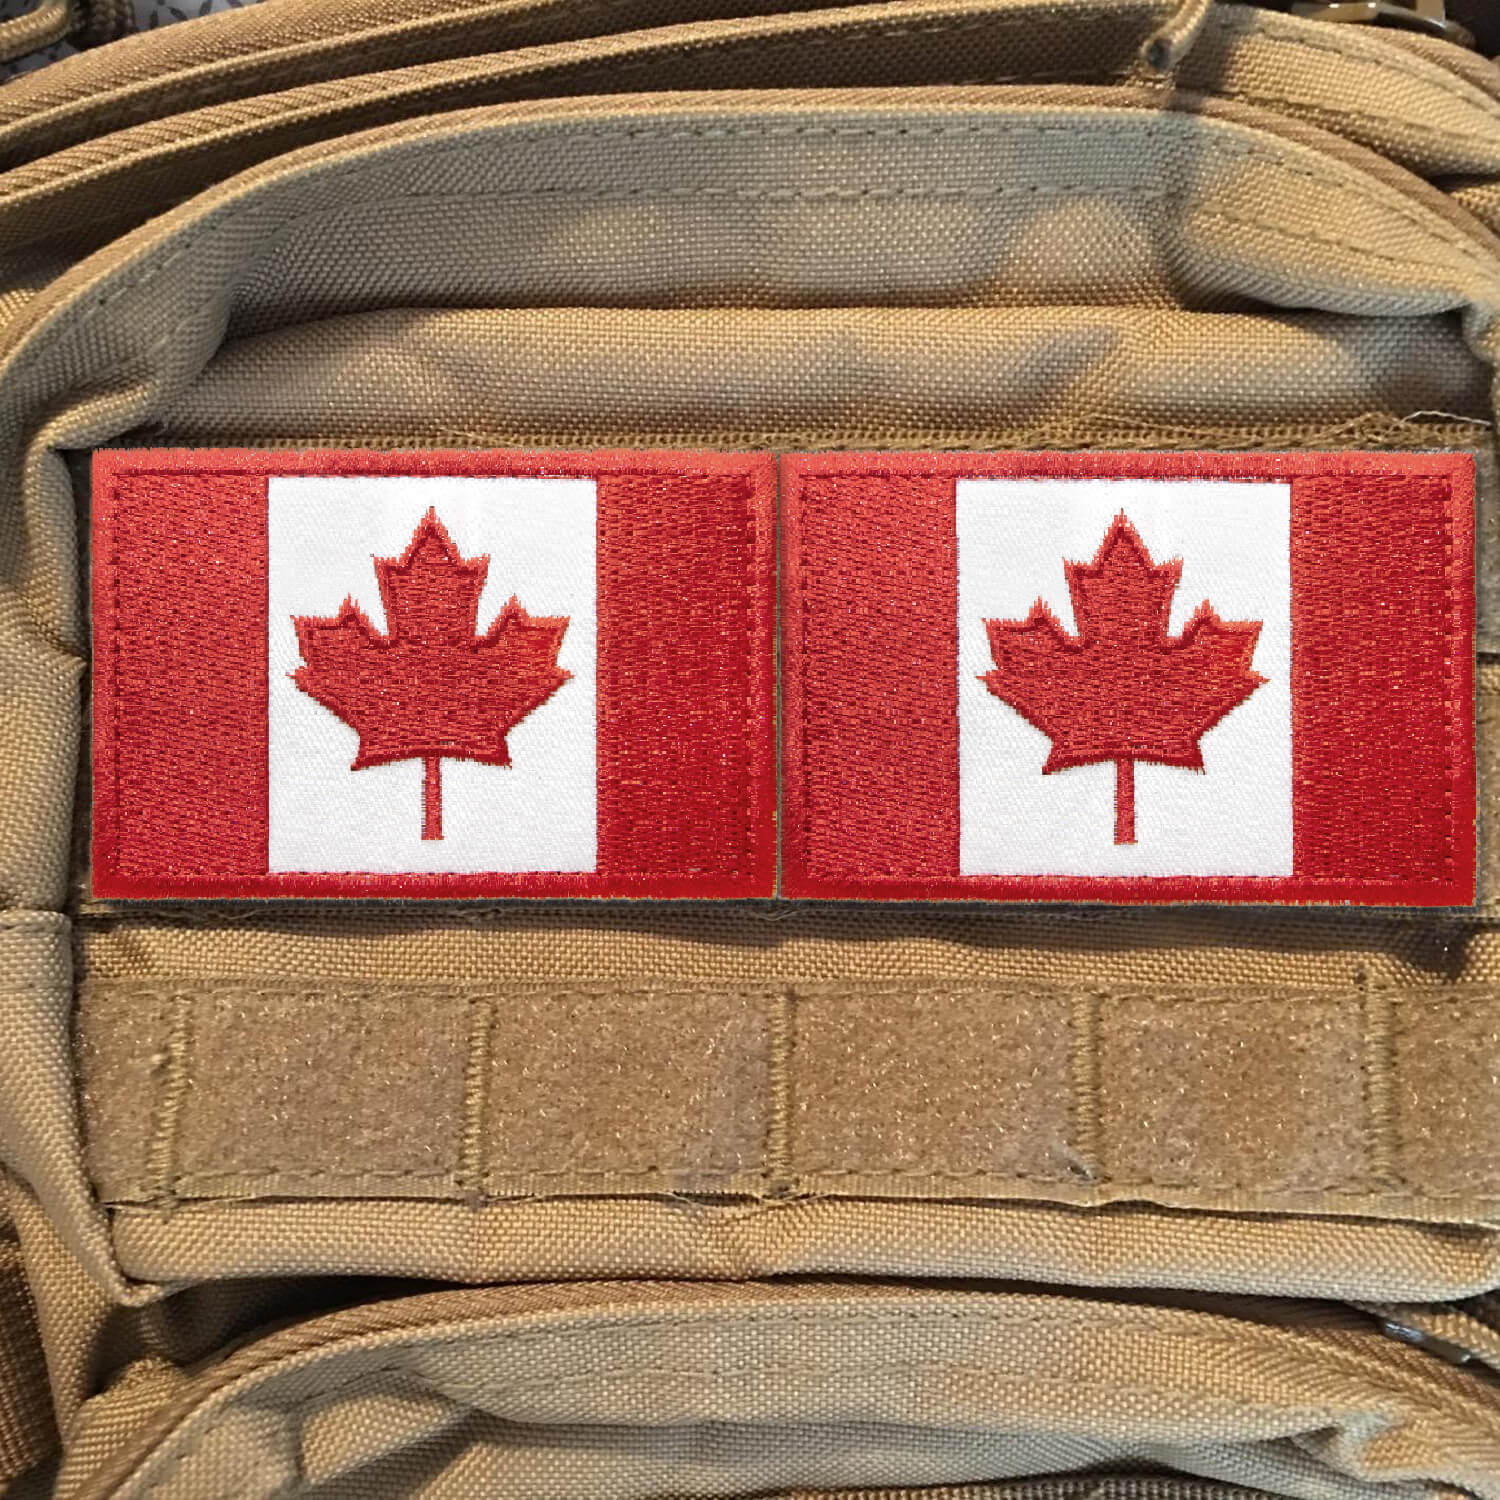  2 PCS Canada Flag Patches Embroidered Tactical Military  Morale Patch Applique Fastener Hook And Loop